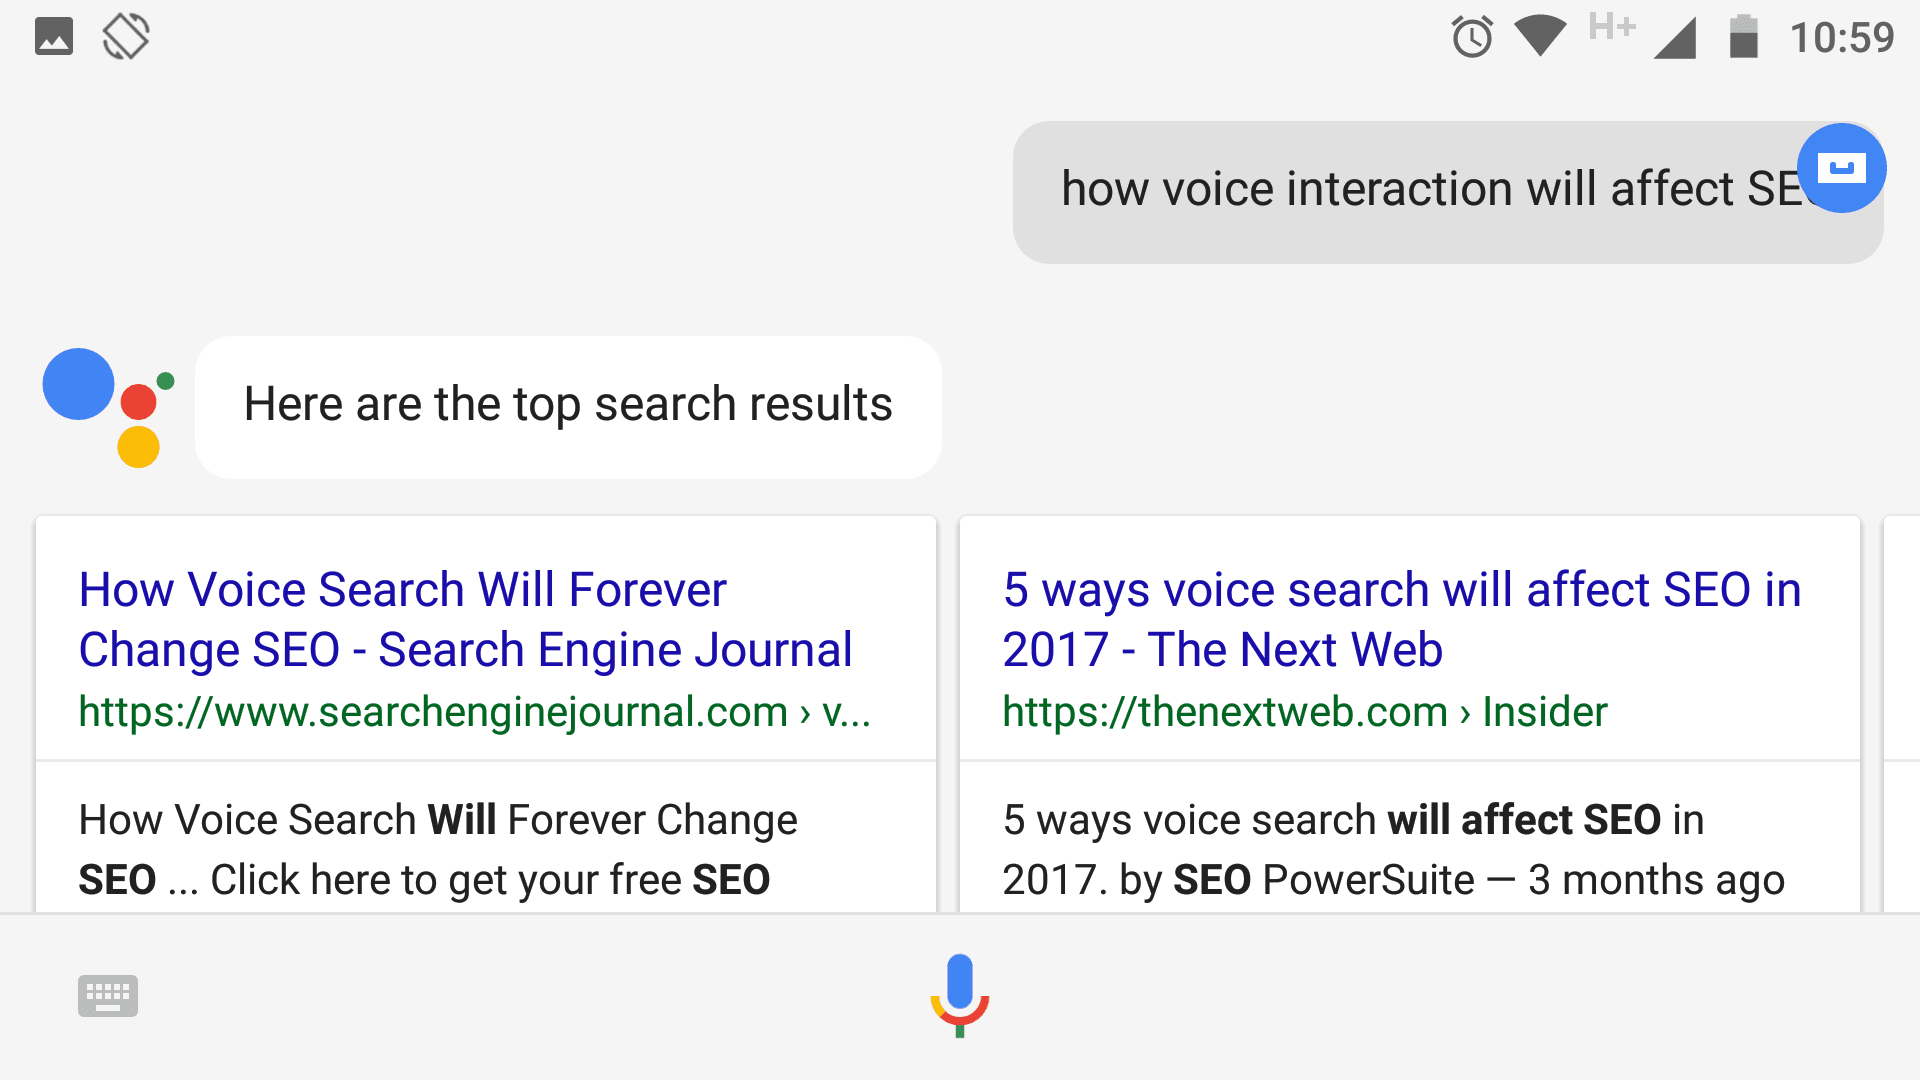 How voice interaction will affect SEO.